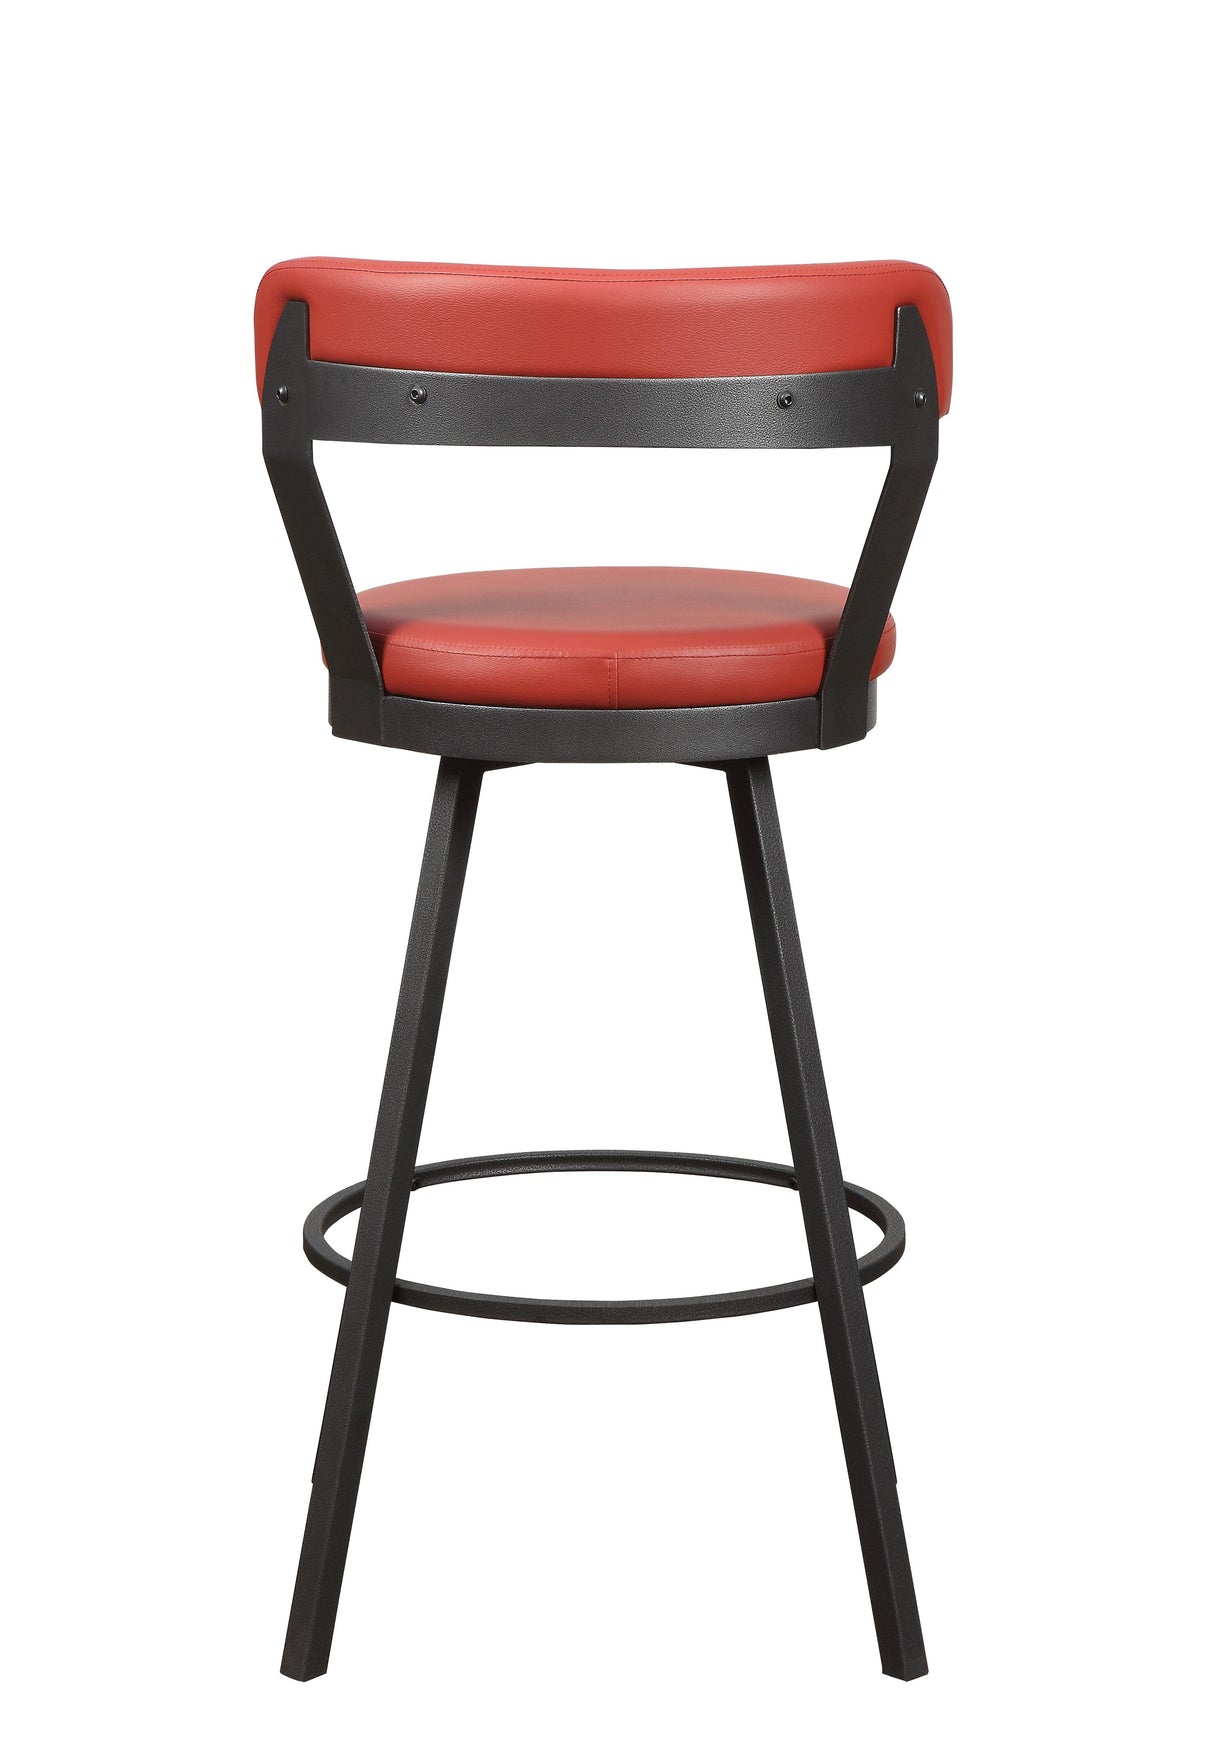 5566-29RD Swivel Pub Height Chair, Red, Set of 2 - Luna Furniture